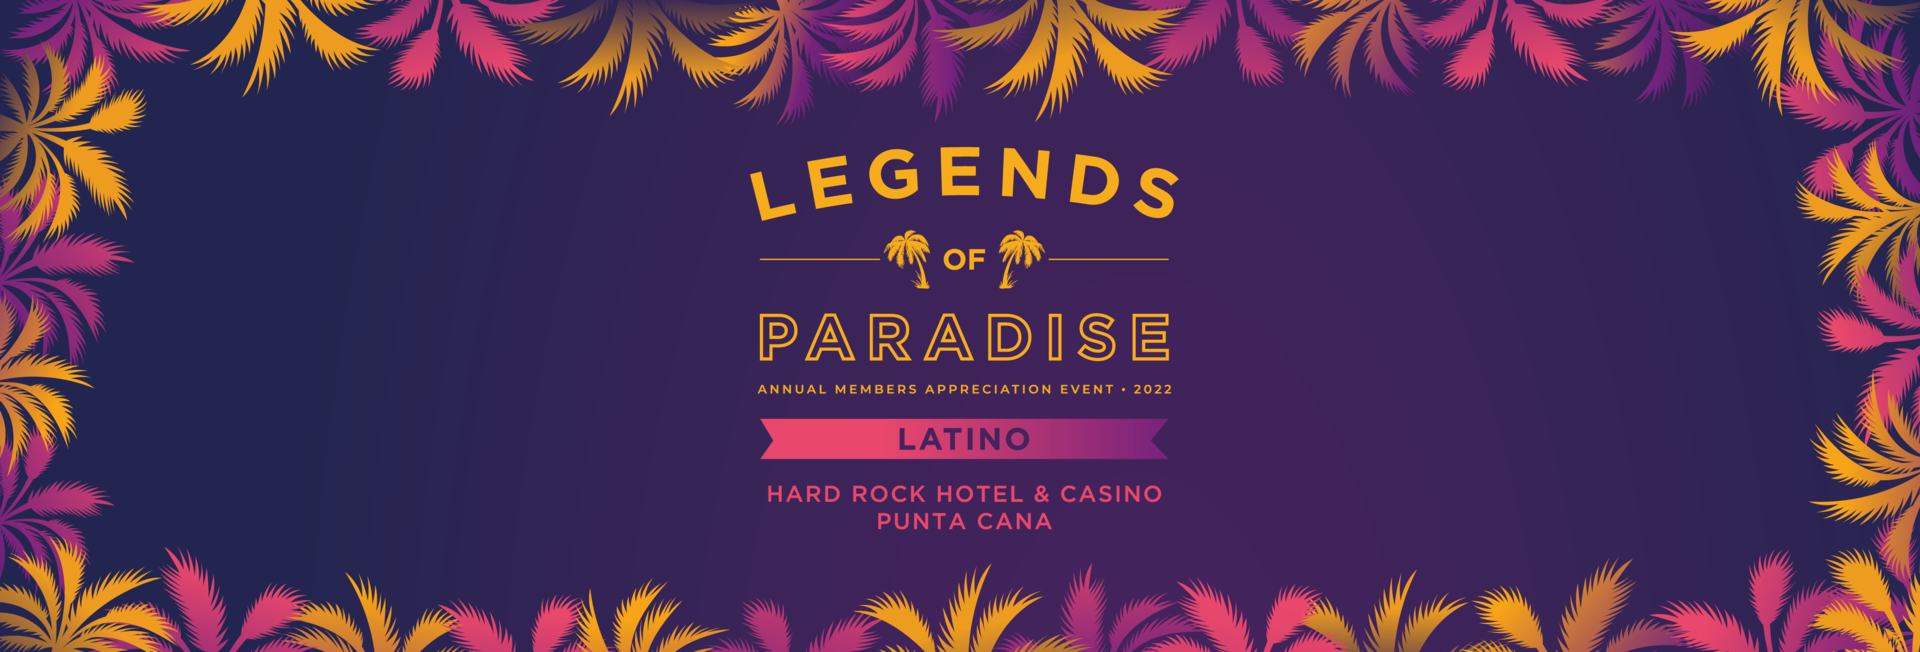 purple background with tropical leaves text legends of paradise latino annual members appreciation event 2022 hard rock hotel and casino punta cana